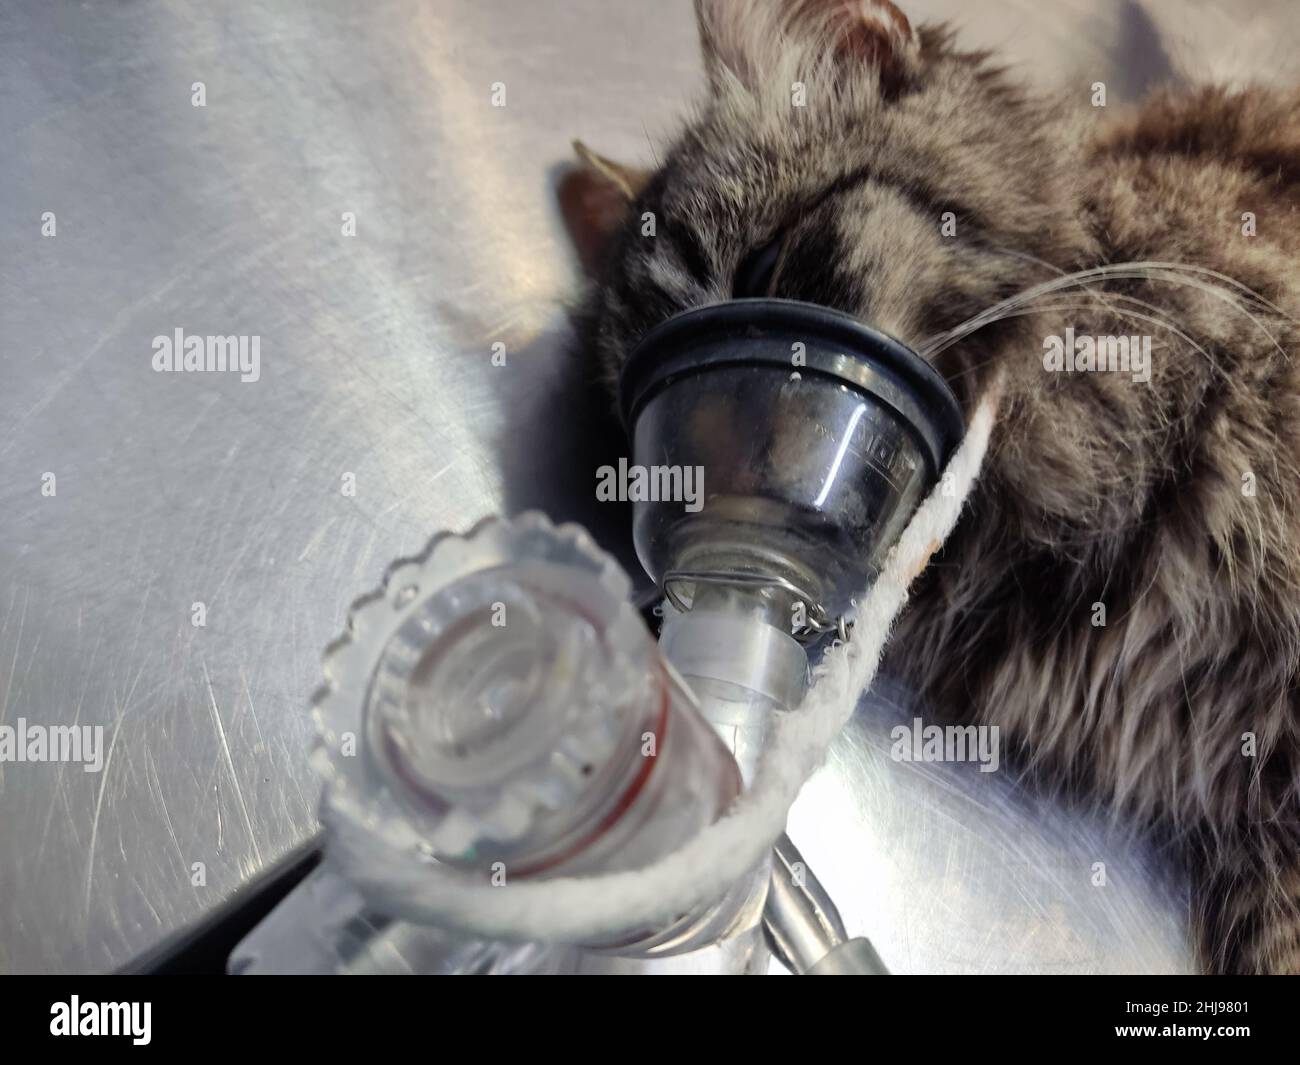 kitten intubated by the vet during surgery Stock Photo